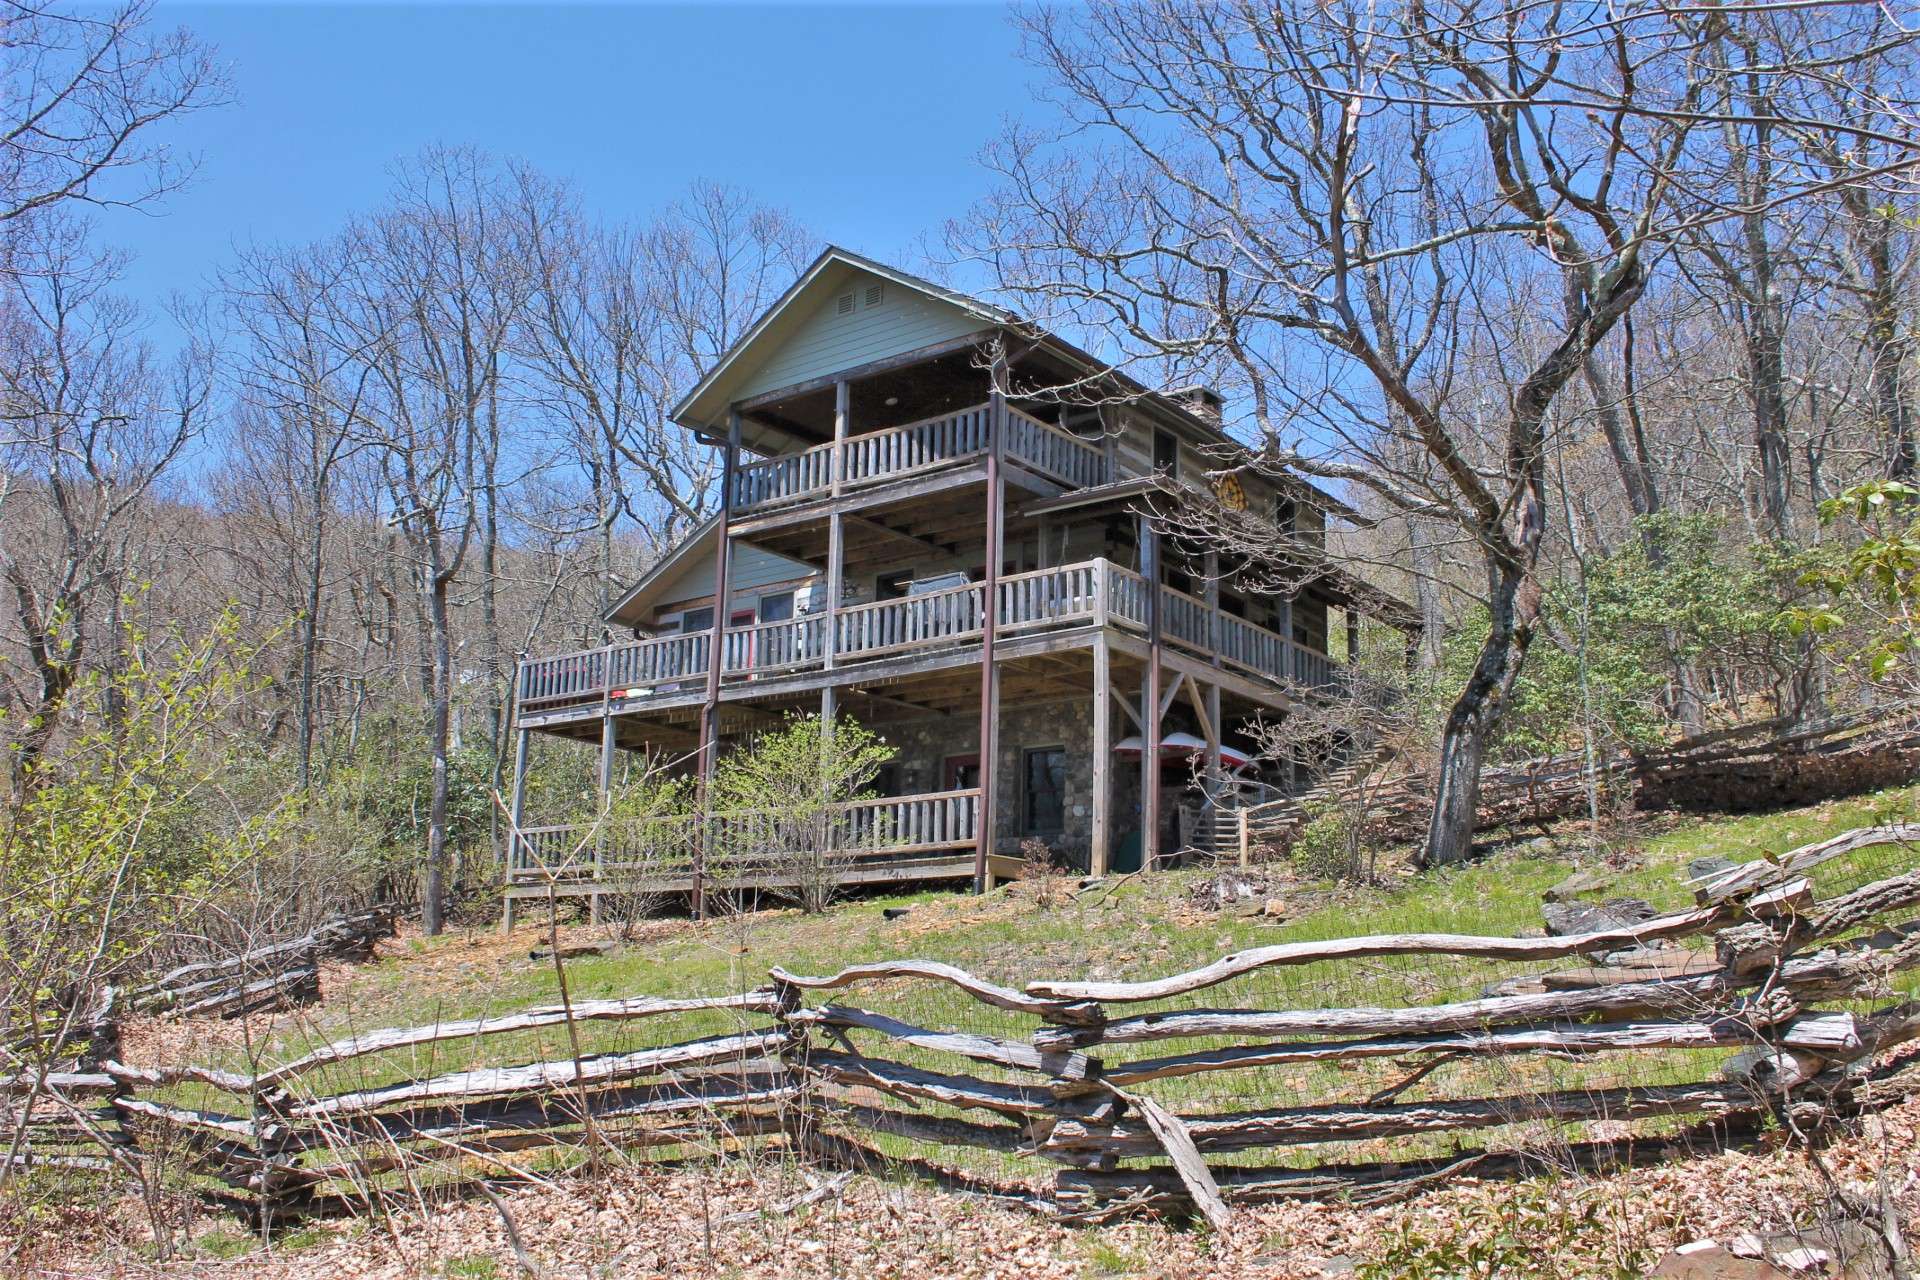 A covered front porch welcomes you while a large covered back deck lures you to relax and enjoy Nature's classroom with unobstructed layered long-range views here in Stonebridge, a private log cabin community located in the Todd area of Southern Ashe County.